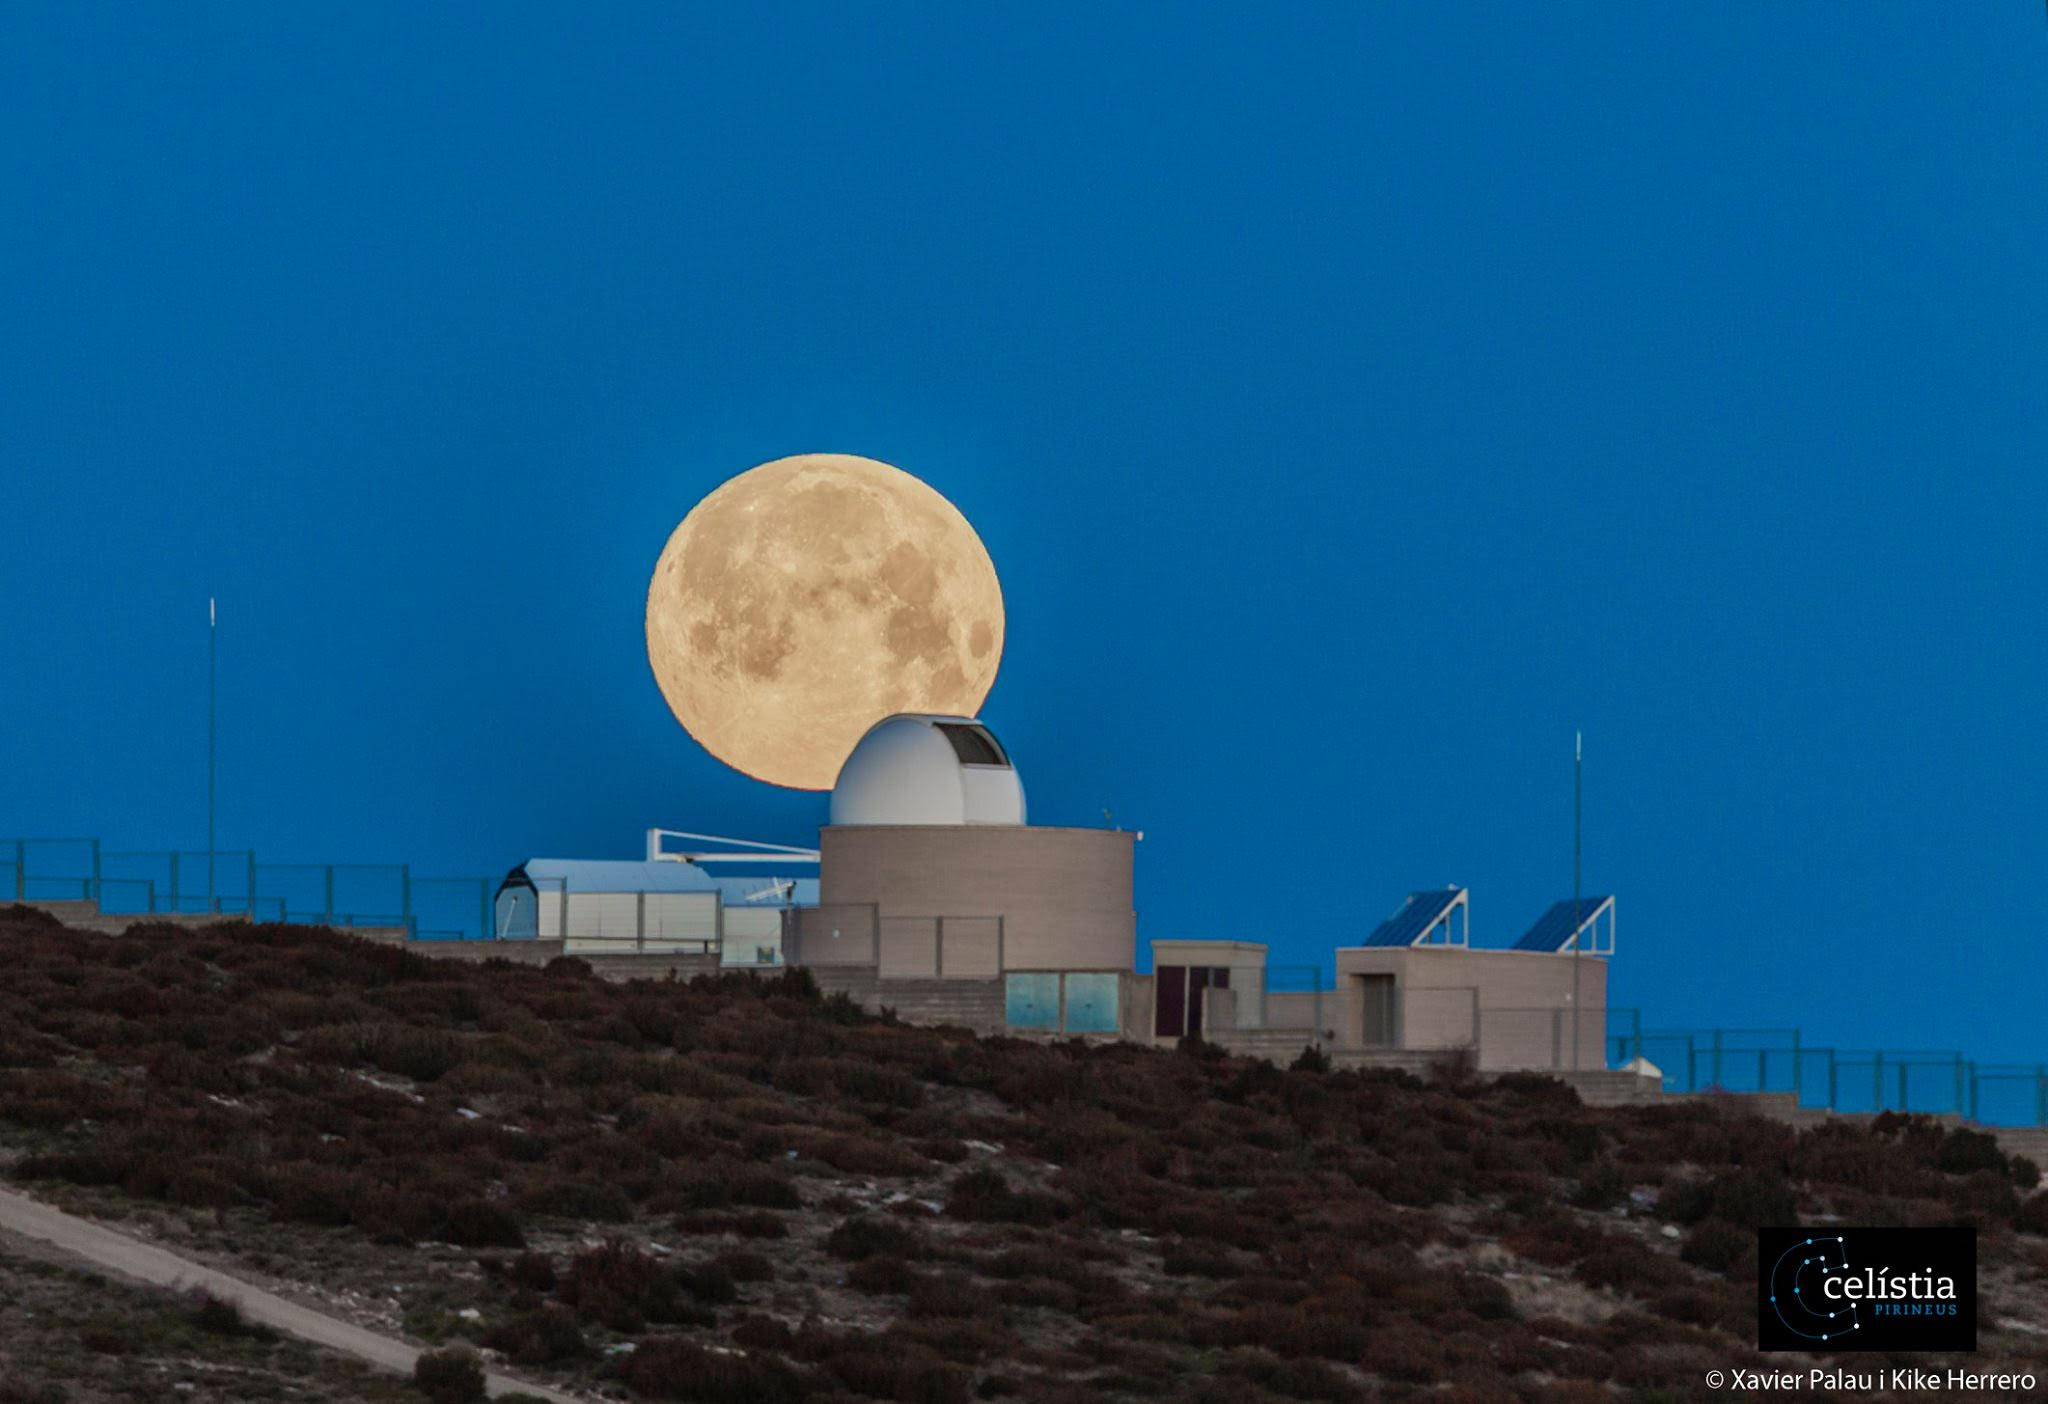 Capture the Moon with your phone and win a refracting telescope or a binoculars starter kit